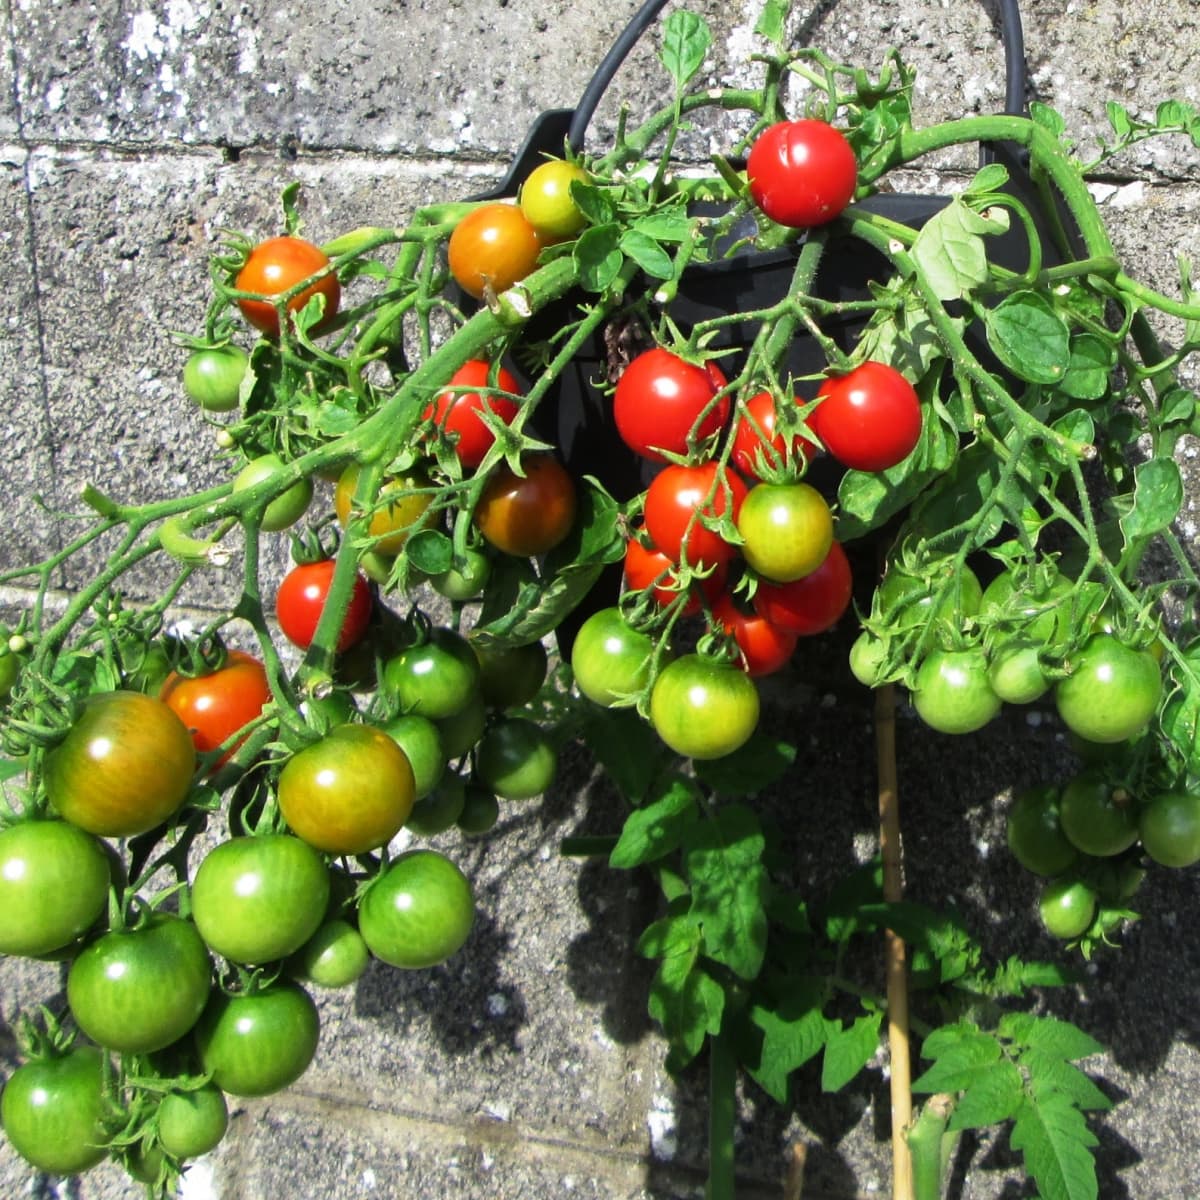 How to Sow, Plant and Grow Juicy Tomatoes in Containers - Dengarden